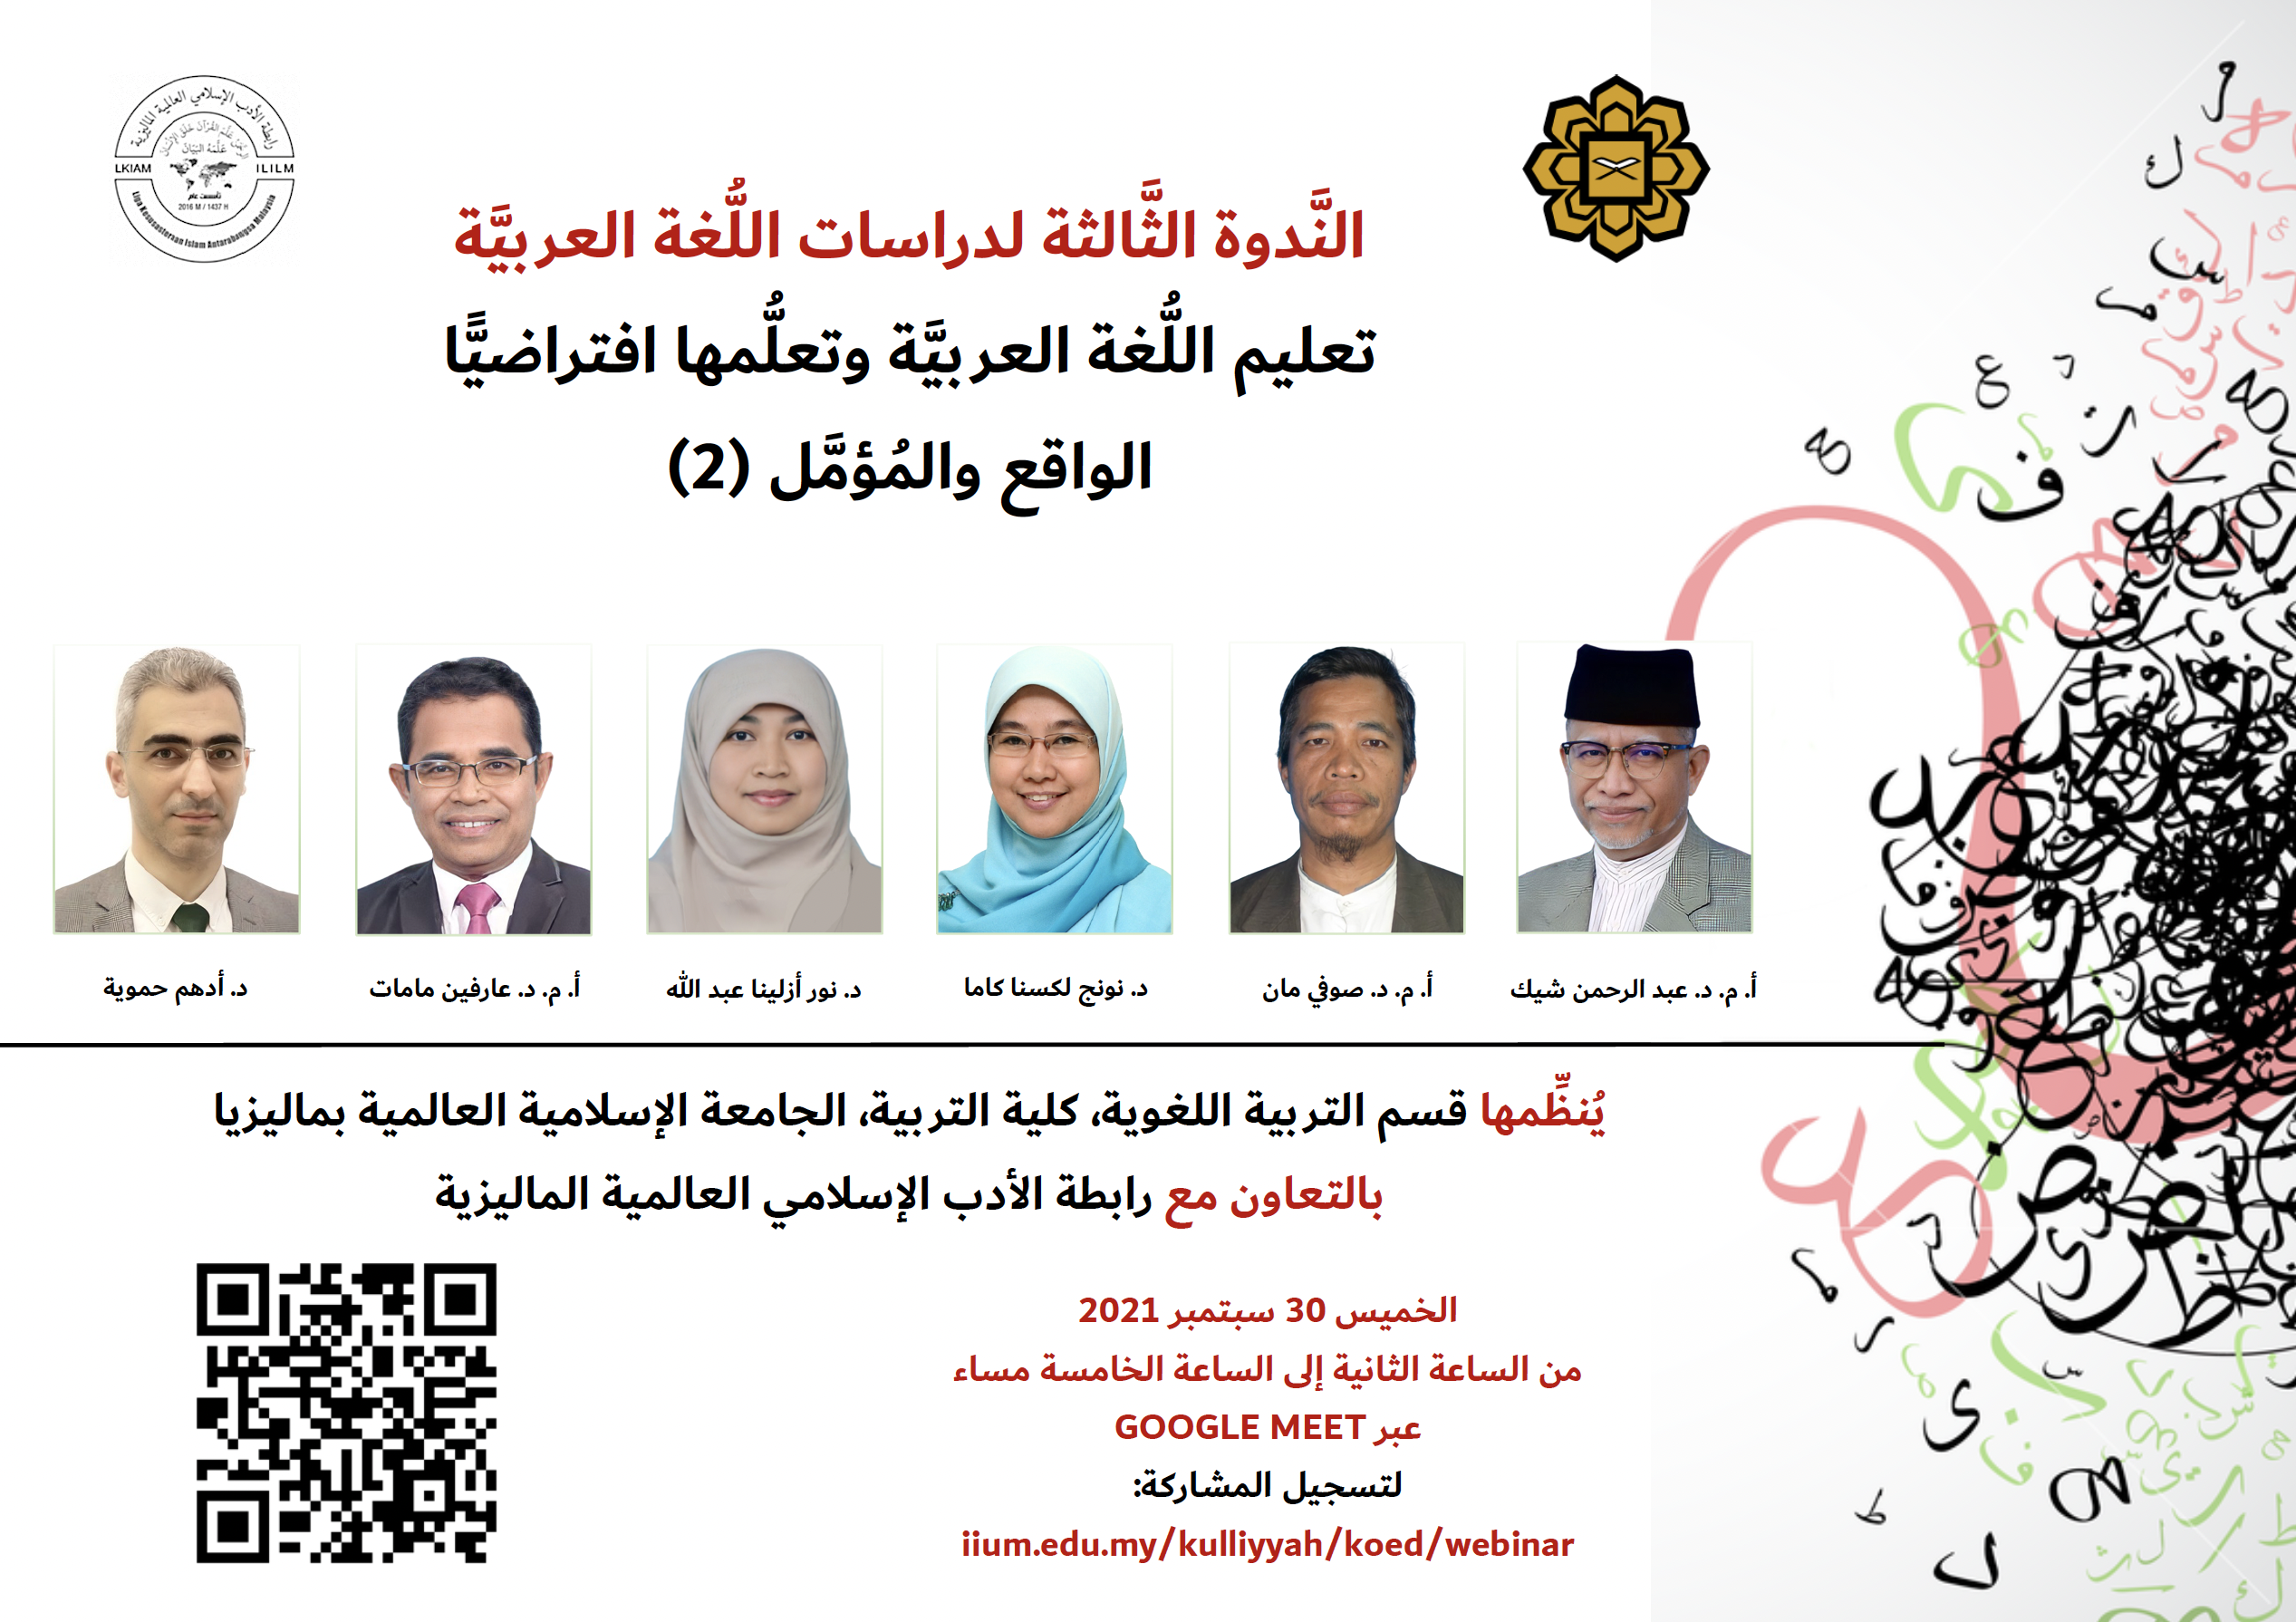 Webinar on Remote Teaching and Learning of Arabic Language: Reality and Expectations (2)